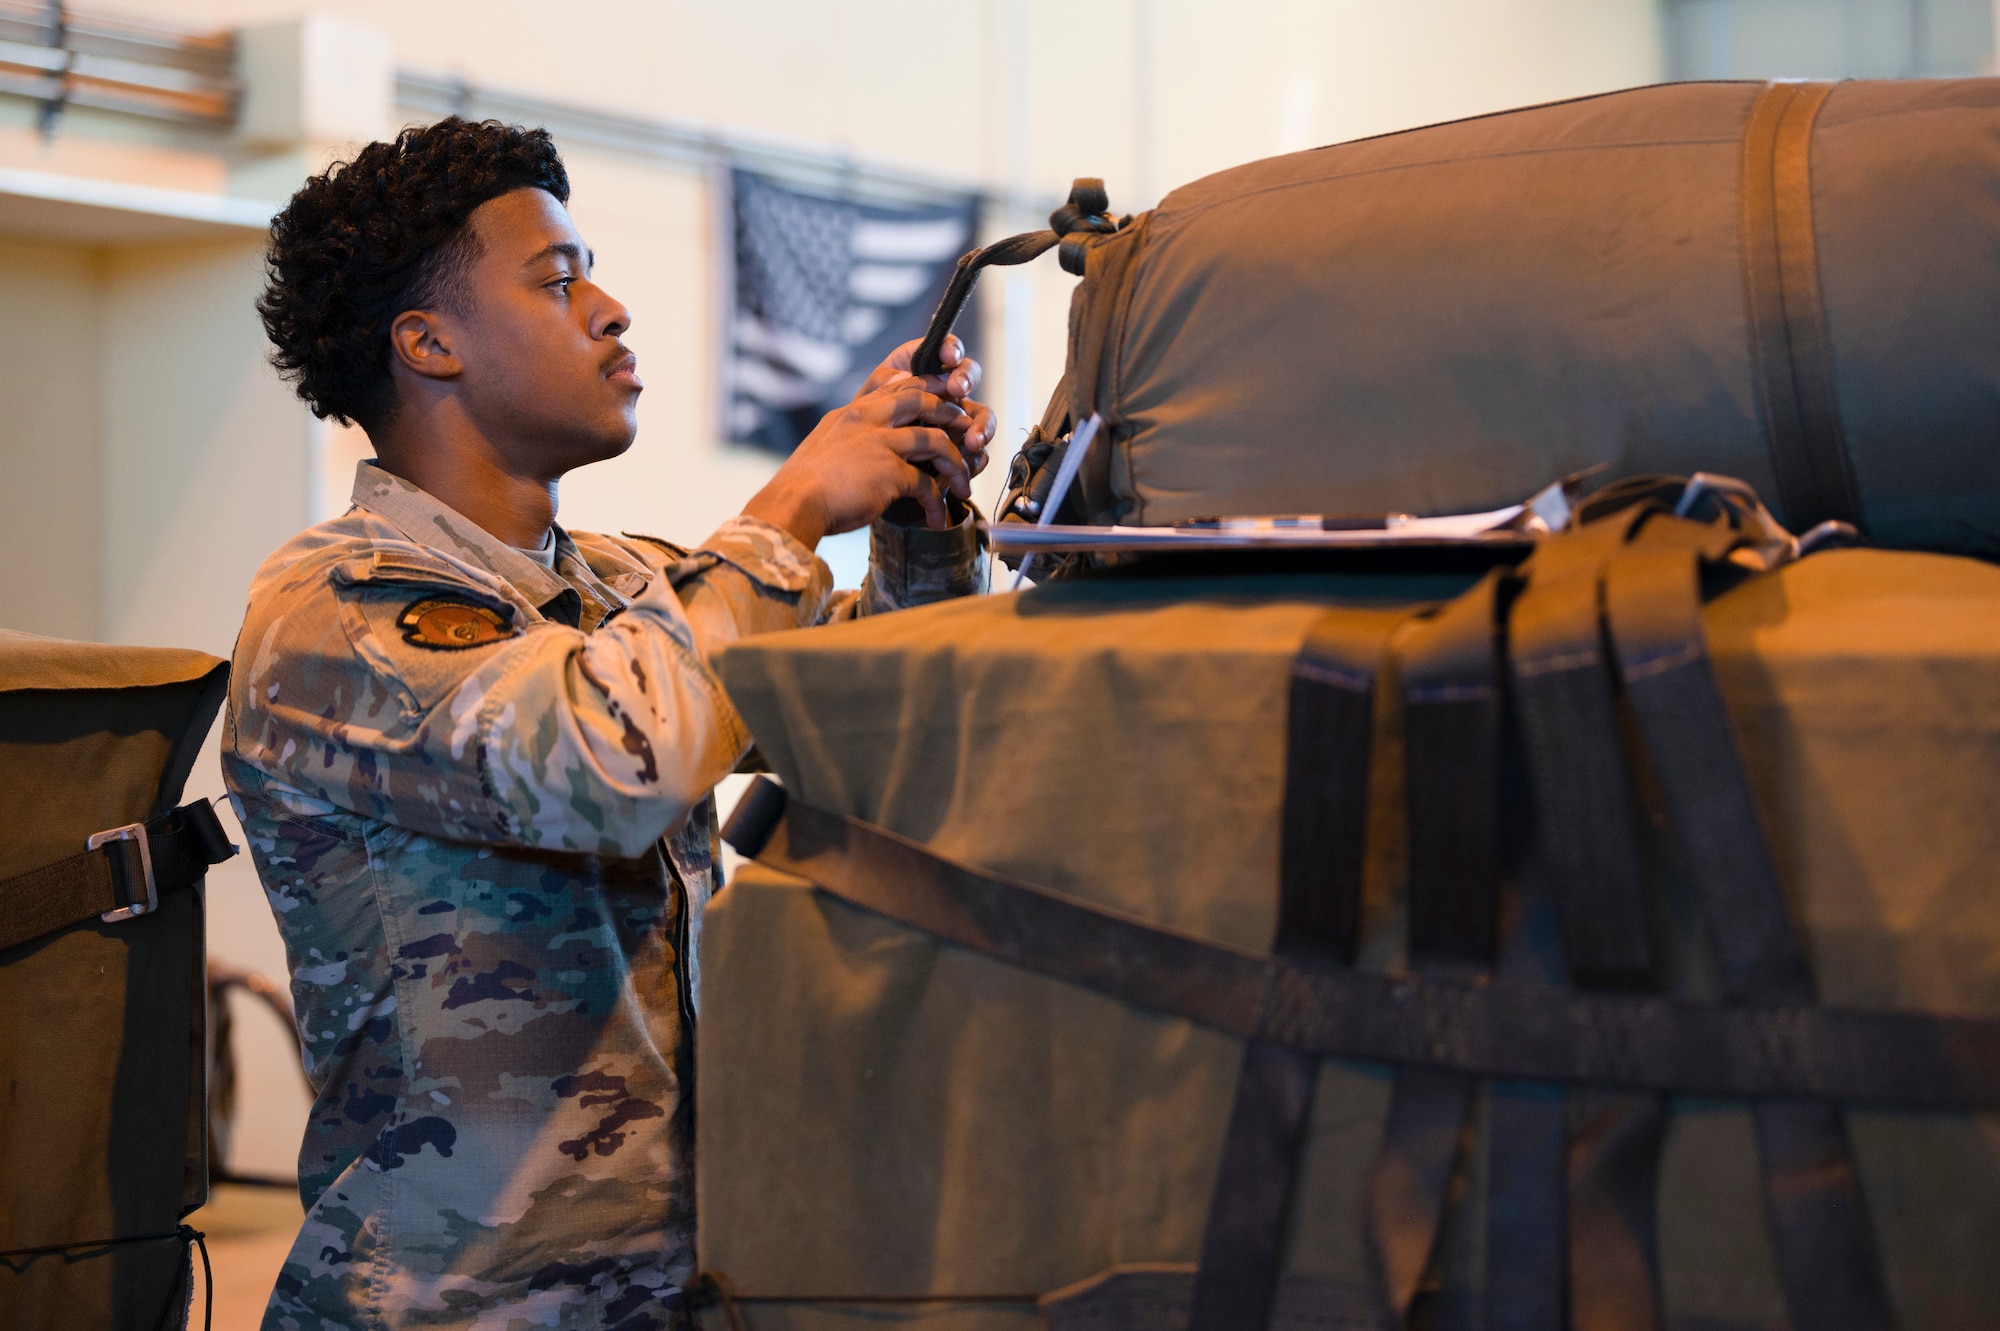 A U.S. Air Force Airman inspects cargo